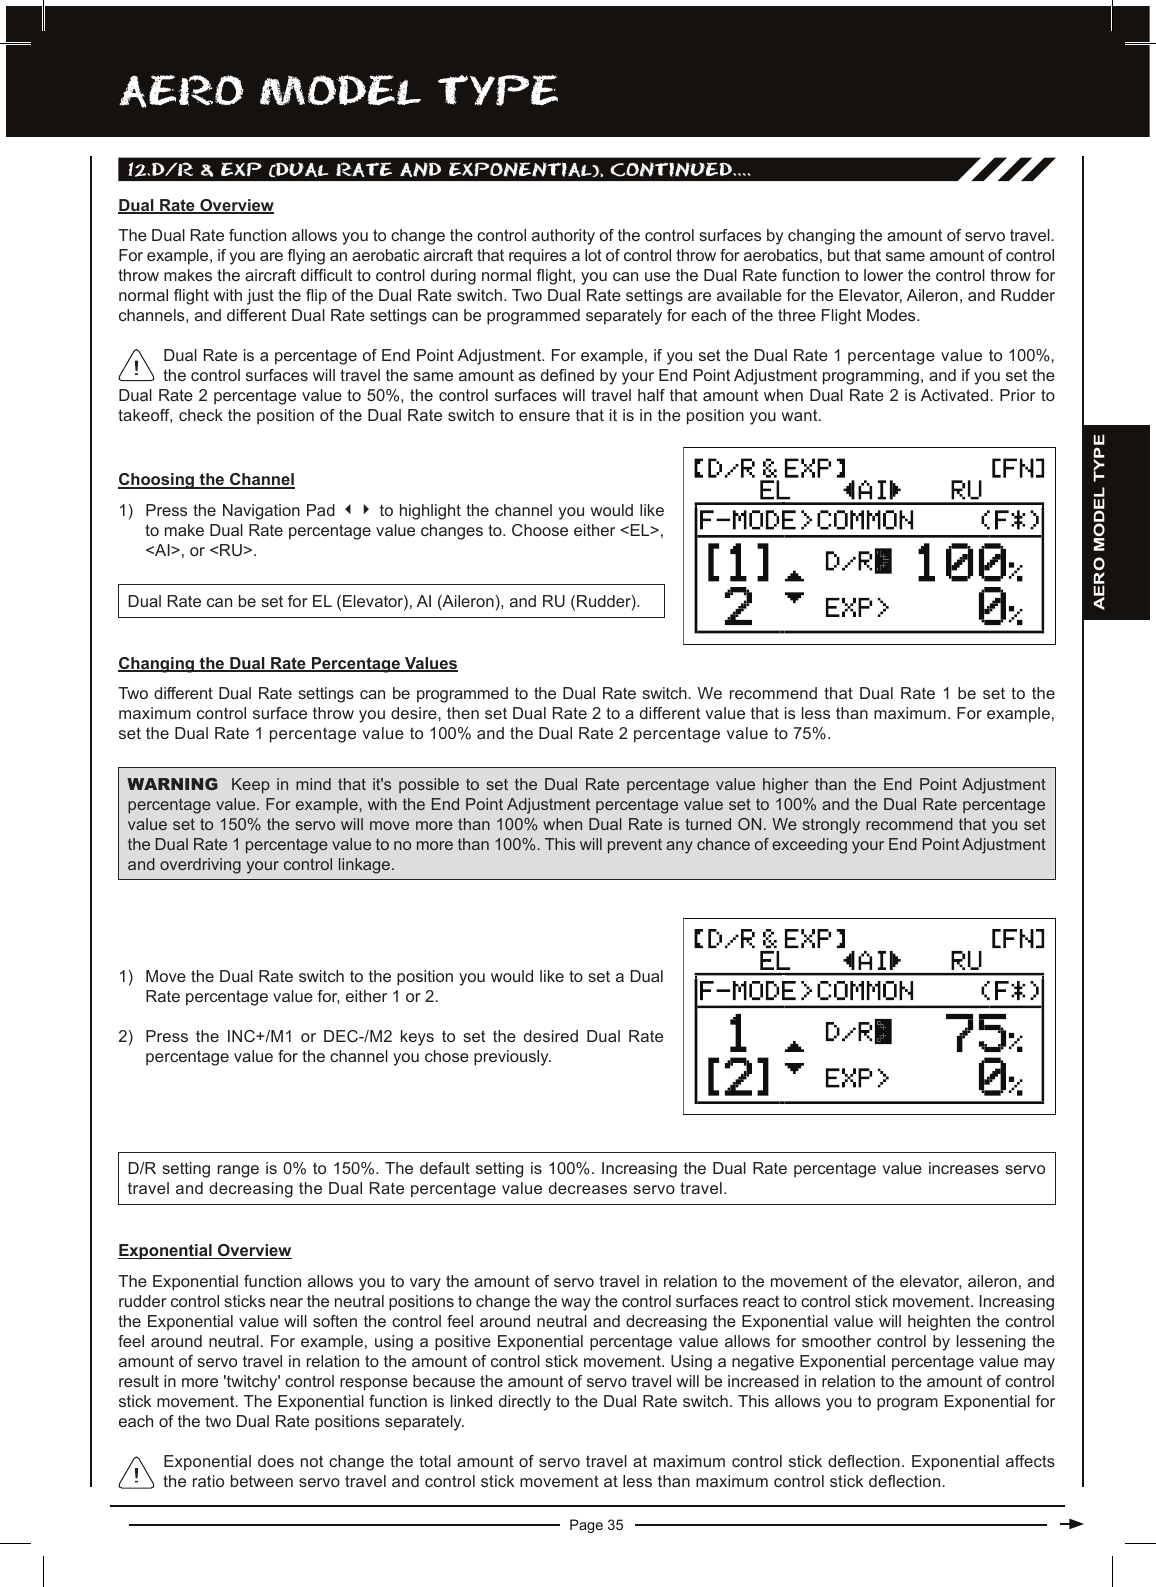 Page 35aERO MODEL TyPEDual Rate is a percentage of End Point Adjustment. For example, if you set the Dual Rate 1 percentage value to 100%, the control surfaces will travel the same amount as dened by your End Point Adjustment programming, and if you set the Dual Rate 2 percentage value to 50%, the control surfaces will travel half that amount when Dual Rate 2 is Activated. Prior to takeoff, check the position of the Dual Rate switch to ensure that it is in the position you want.Dual Rate OverviewThe Dual Rate function allows you to change the control authority of the control surfaces by changing the amount of servo travel. For example, if you are ying an aerobatic aircraft that requires a lot of control throw for aerobatics, but that same amount of control throw makes the aircraft difcult to control during normal ight, you can use the Dual Rate function to lower the control throw for normal ight with just the ip of the Dual Rate switch. Two Dual Rate settings are available for the Elevator, Aileron, and Rudder channels, and different Dual Rate settings can be programmed separately for each of the three Flight Modes.Changing the Dual Rate Percentage ValuesTwo different Dual Rate settings can be programmed to the Dual Rate switch. We recommend that Dual Rate 1 be set to the maximum control surface throw you desire, then set Dual Rate 2 to a different value that is less than maximum. For example, set the Dual Rate 1 percentage value to 100% and the Dual Rate 2 percentage value to 75%.WARNING Keep in  mind  that  it&apos;s possible to set the  Dual  Rate  percentage value higher than  the  End  Point Adjustment percentage value. For example, with the End Point Adjustment percentage value set to 100% and the Dual Rate percentage value set to 150% the servo will move more than 100% when Dual Rate is turned ON. We strongly recommend that you set the Dual Rate 1 percentage value to no more than 100%. This will prevent any chance of exceeding your End Point Adjustment and overdriving your control linkage.Choosing the Channel1) Press the Navigation Pad 34 to highlight the channel you would like to make Dual Rate percentage value changes to. Choose either &lt;EL&gt;, &lt;AI&gt;, or &lt;RU&gt;.Dual Rate can be set for EL (Elevator), AI (Aileron), and RU (Rudder).D/R setting range is 0% to 150%. The default setting is 100%. Increasing the Dual Rate percentage value increases servo travel and decreasing the Dual Rate percentage value decreases servo travel.1) Move the Dual Rate switch to the position you would like to set a Dual Rate percentage value for, either 1 or 2. 2) Press the INC+/M1 or DEC-/M2 keys to set the desired Dual Rate percentage value for the channel you chose previously.Exponential OverviewThe Exponential function allows you to vary the amount of servo travel in relation to the movement of the elevator, aileron, and rudder control sticks near the neutral positions to change the way the control surfaces react to control stick movement. Increasing the Exponential value will soften the control feel around neutral and decreasing the Exponential value will heighten the control feel around neutral. For example, using a positive Exponential percentage value allows for smoother control by lessening the amount of servo travel in relation to the amount of control stick movement. Using a negative Exponential percentage value may result in more &apos;twitchy&apos; control response because the amount of servo travel will be increased in relation to the amount of control stick movement. The Exponential function is linked directly to the Dual Rate switch. This allows you to program Exponential for each of the two Dual Rate positions separately.Exponential does not change the total amount of servo travel at maximum control stick deection. Exponential affects the ratio between servo travel and control stick movement at less than maximum control stick deection.12.D/R &amp; EXP (DUaL RaTE anD EXPOnEnTiaL), cOnTinUED....AERO MODEL TYPE